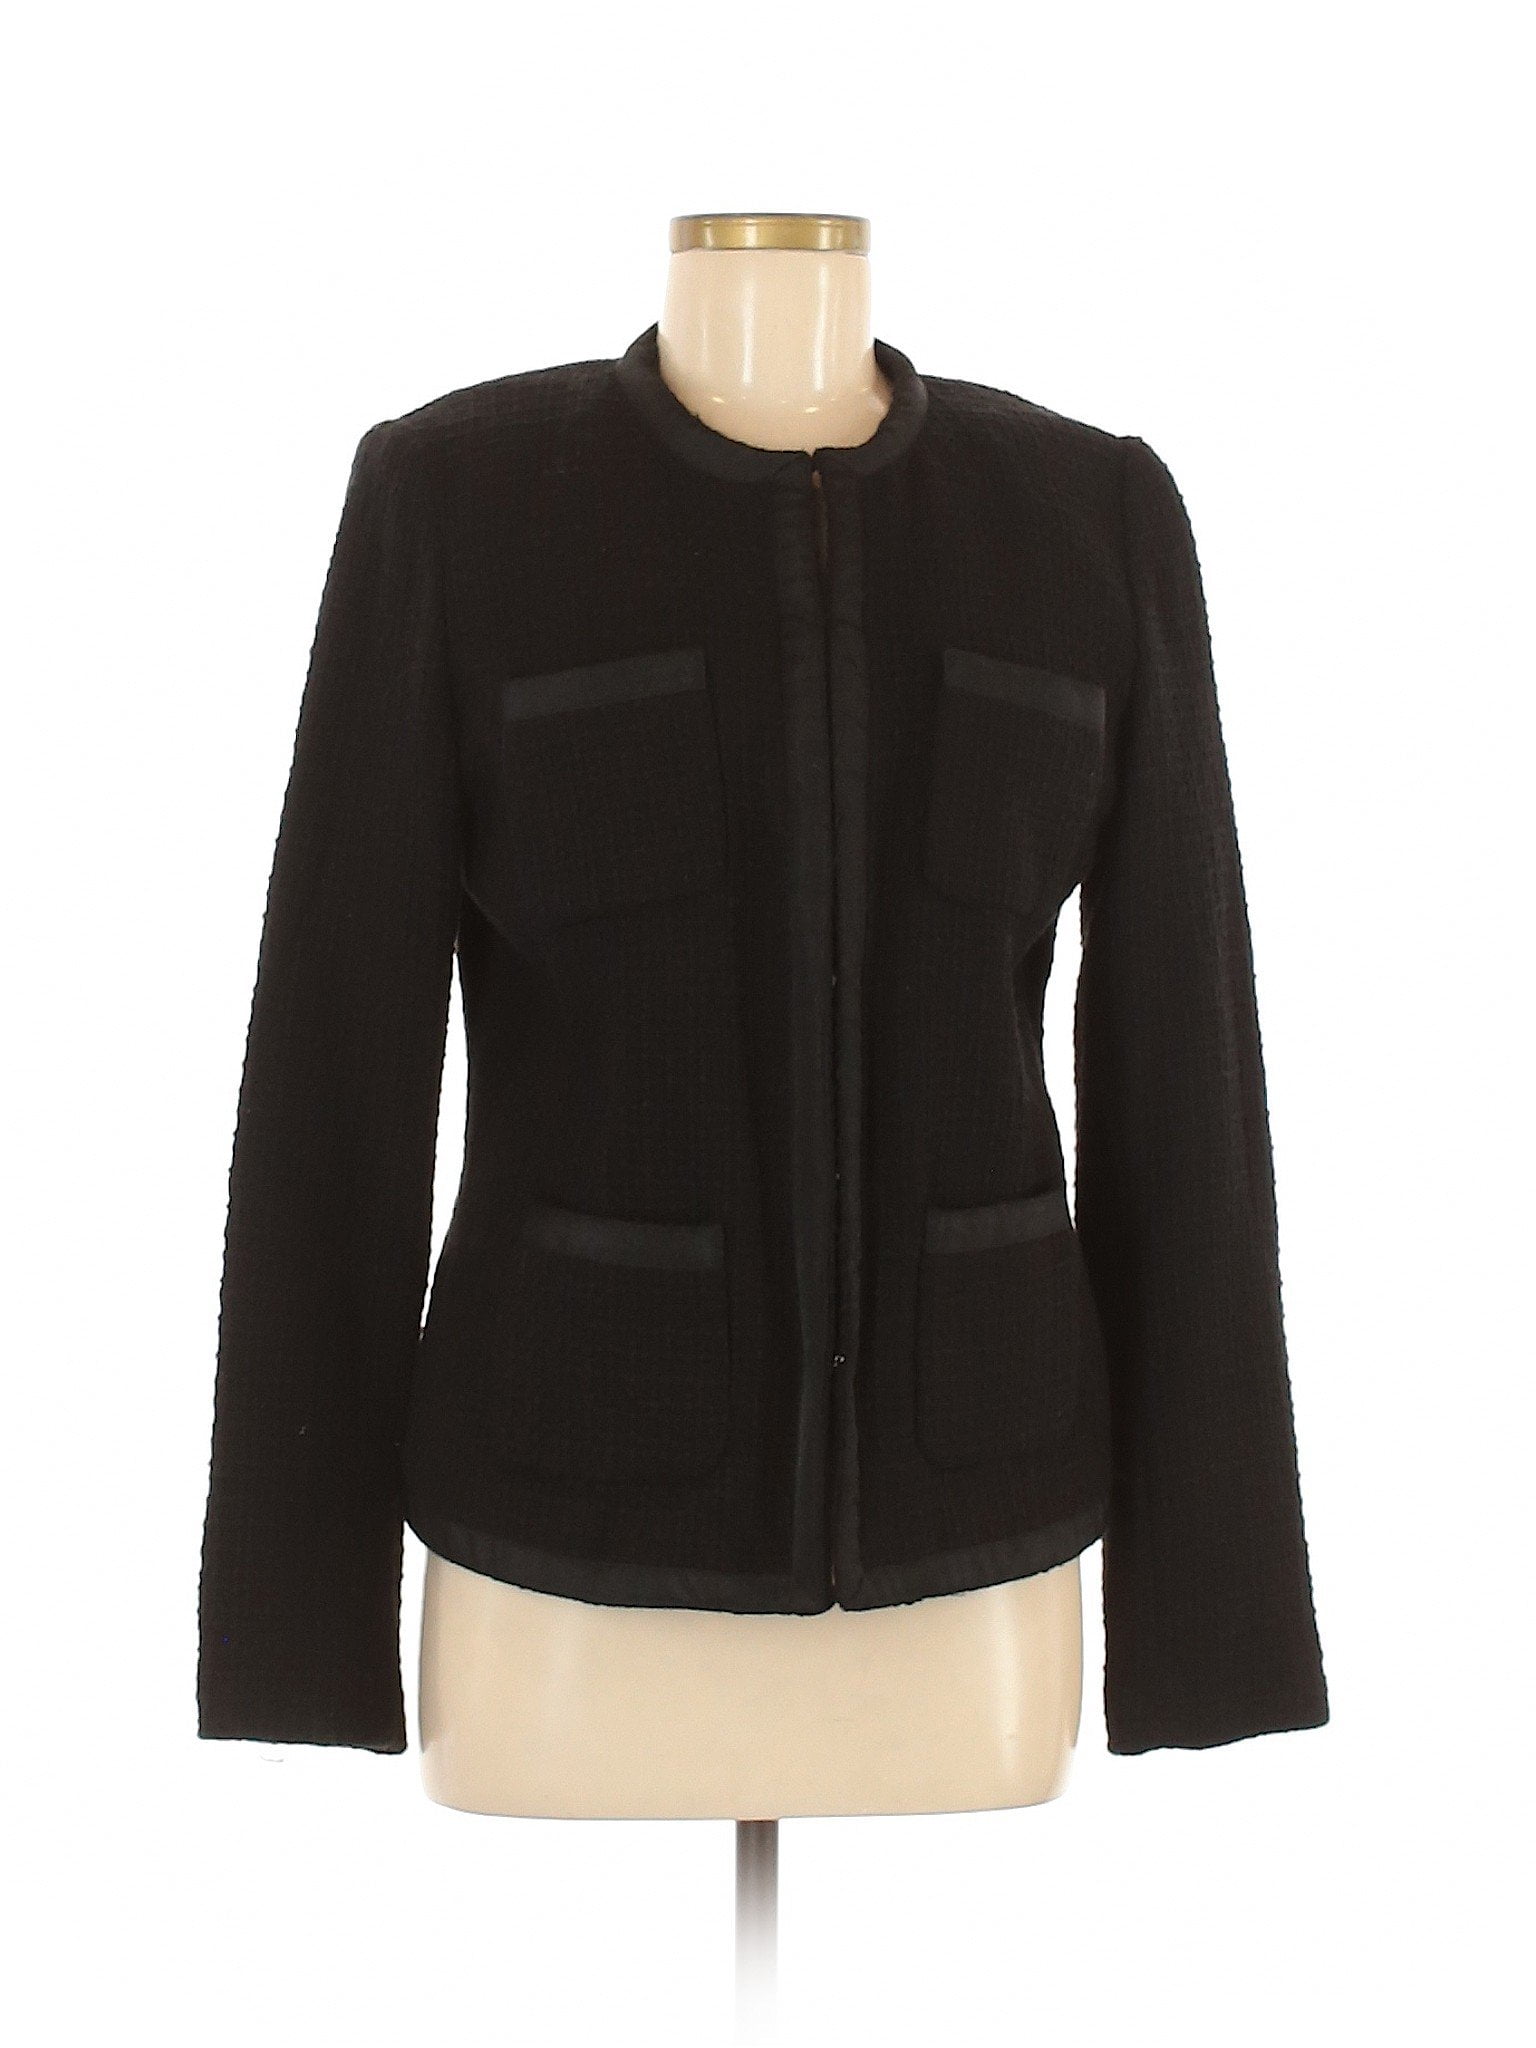 Pre-Owned Laura Clement Collection Jacket - Walmart.com